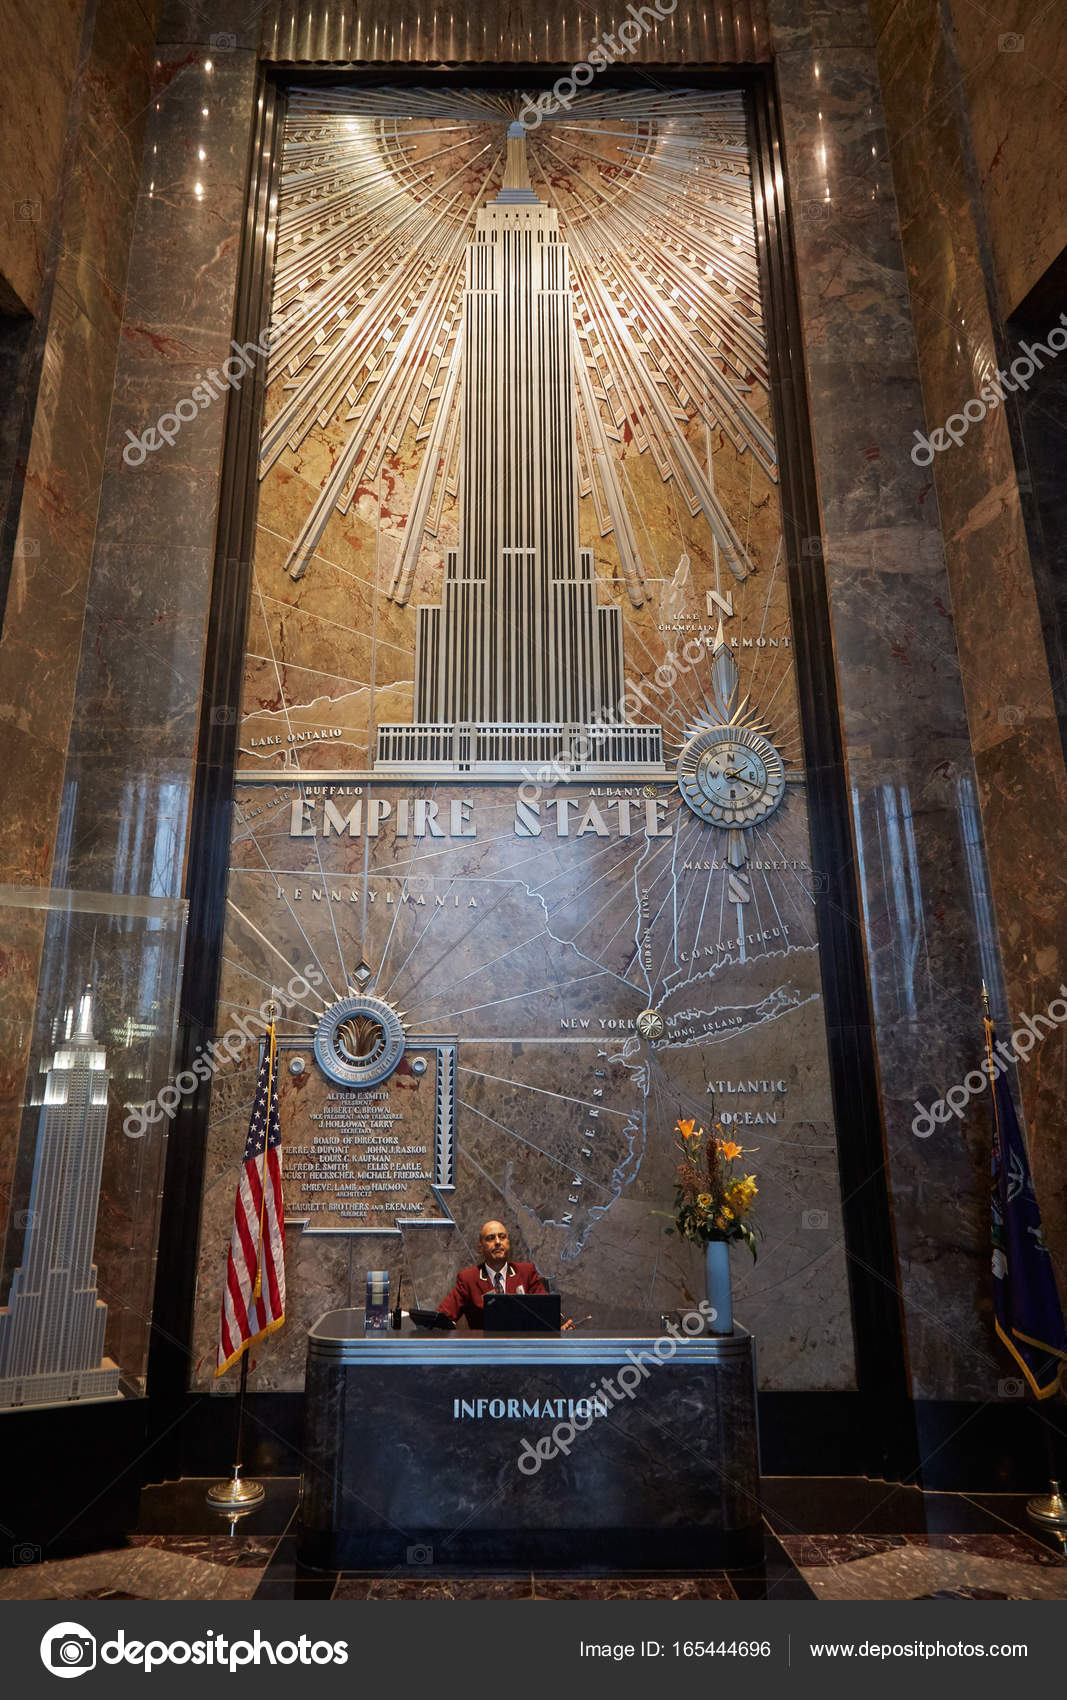 Empire State Building Hall Interior With Marble Decorations